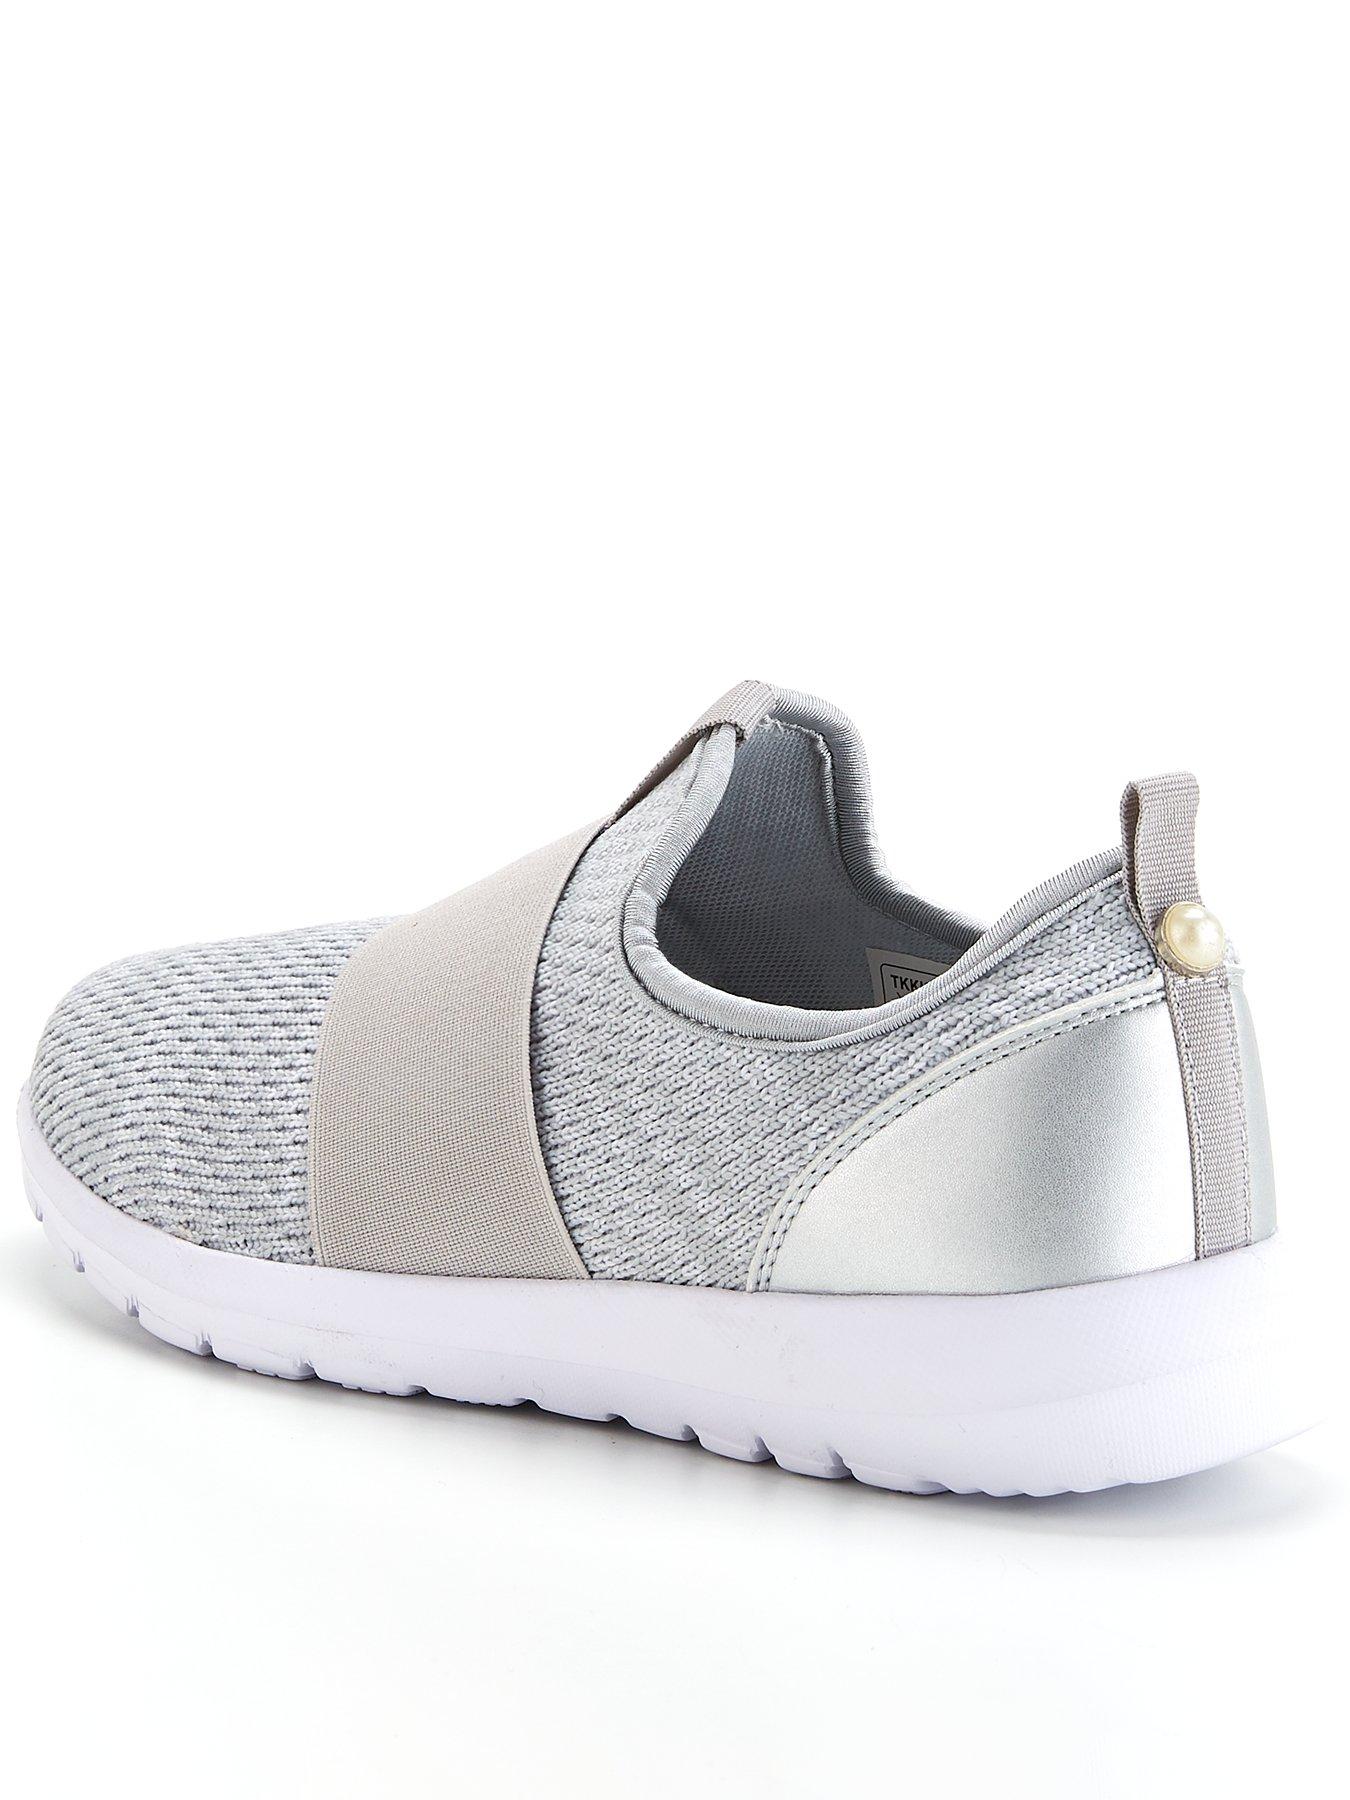 Women Dual Wide Fit Andie Elastic Strap Knit Trainer - Grey